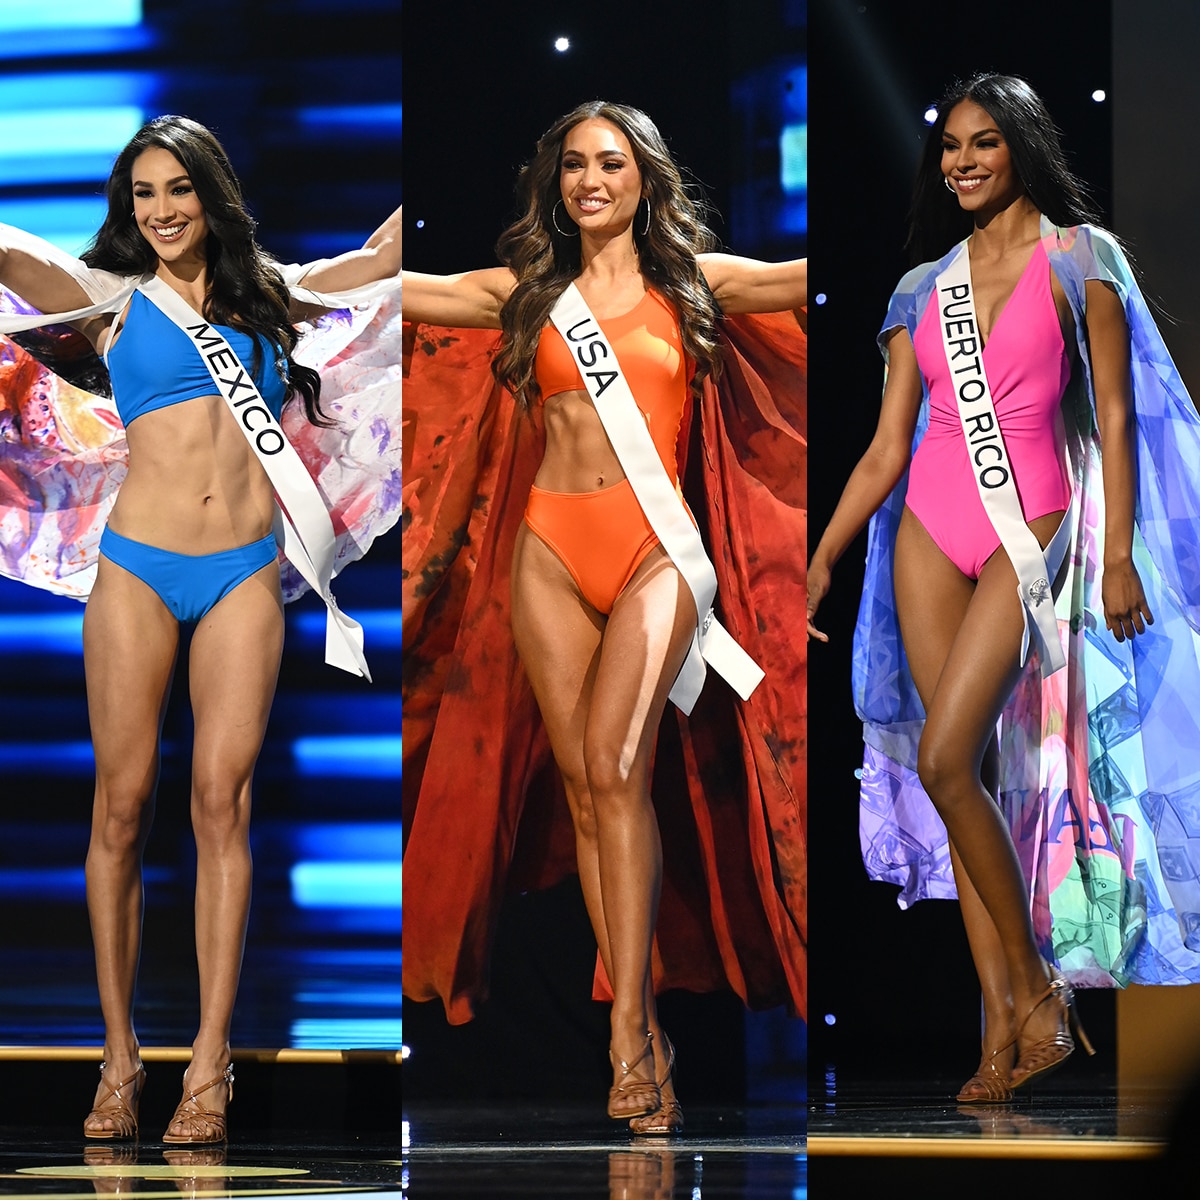 Bye-bye, bikinis: A look back at the Miss America Pageant